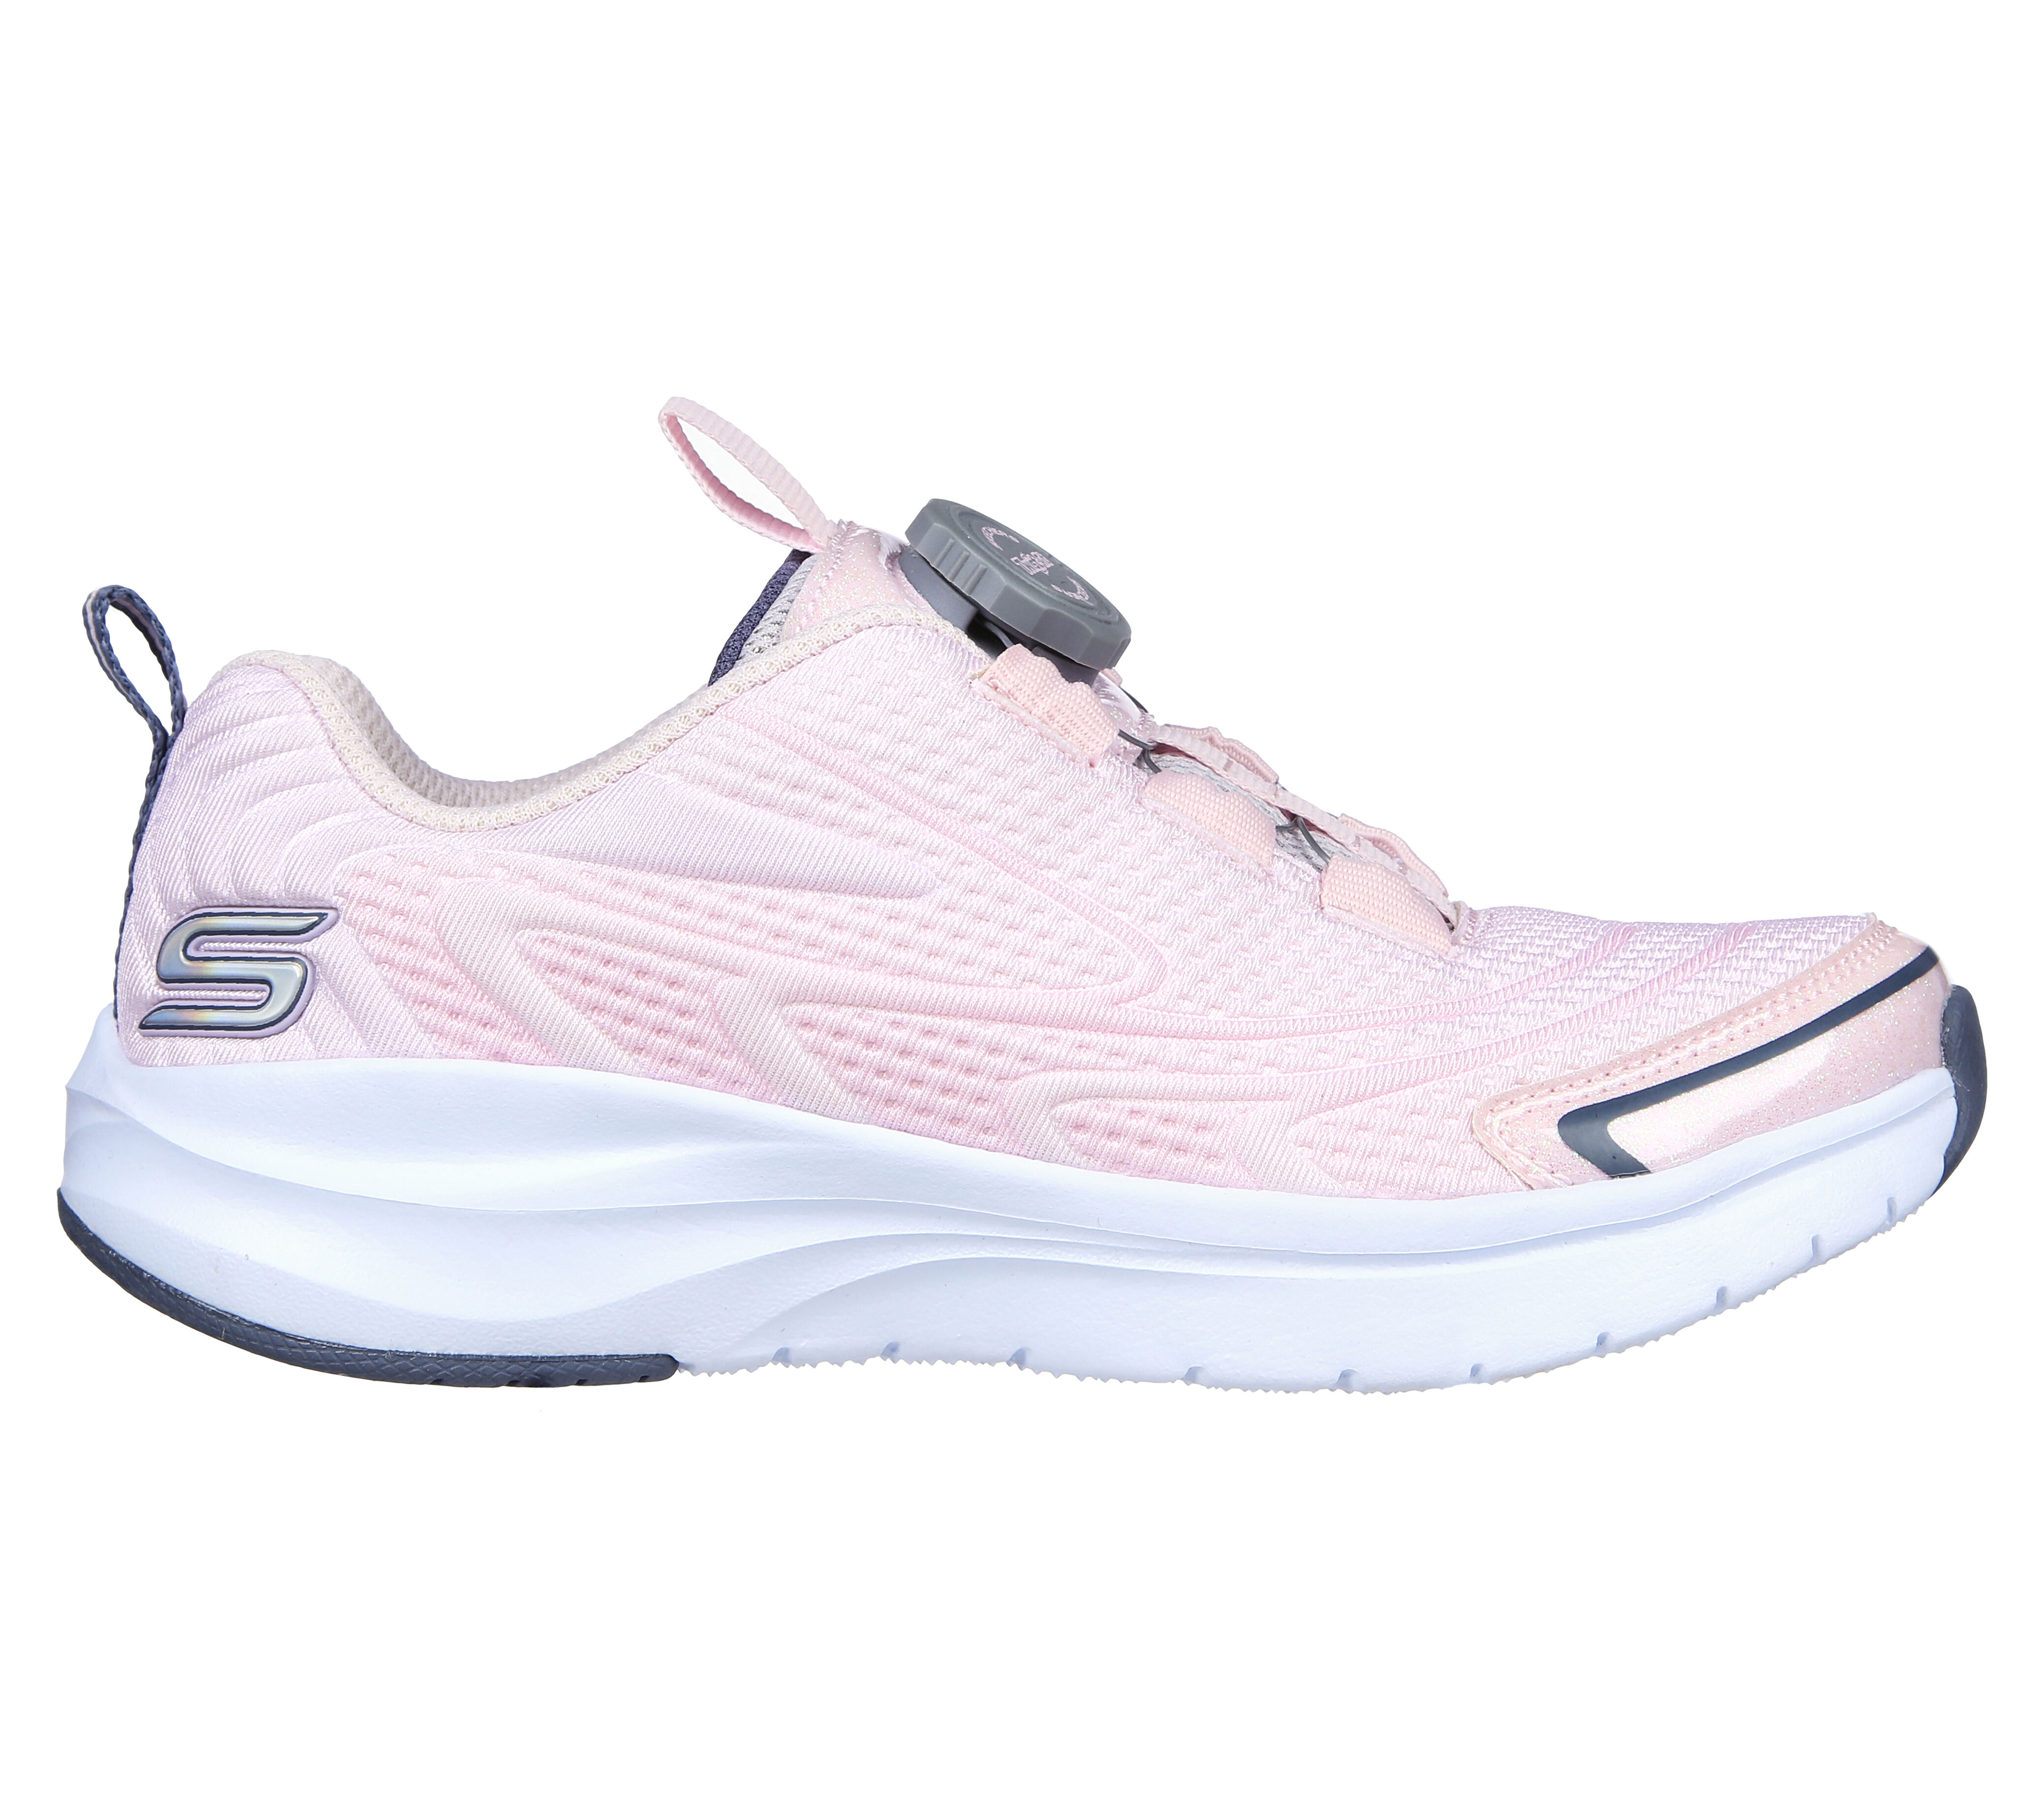 skechers shoes for girls